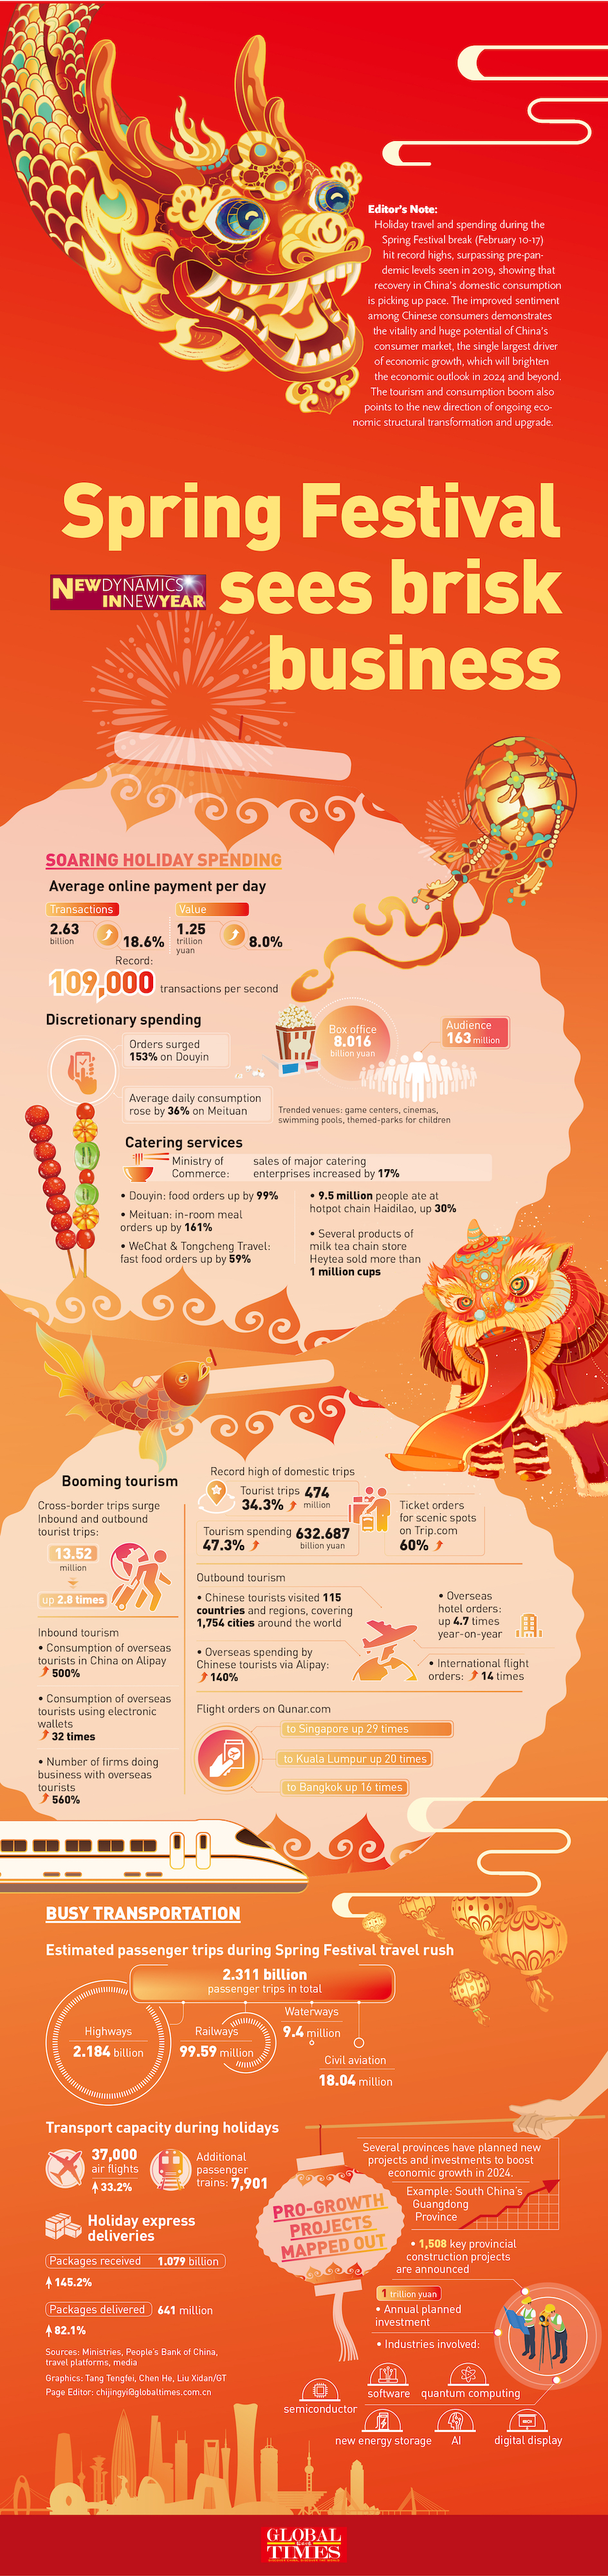 Spring Festival holidays ignite consumption boom in China Graphic: GT